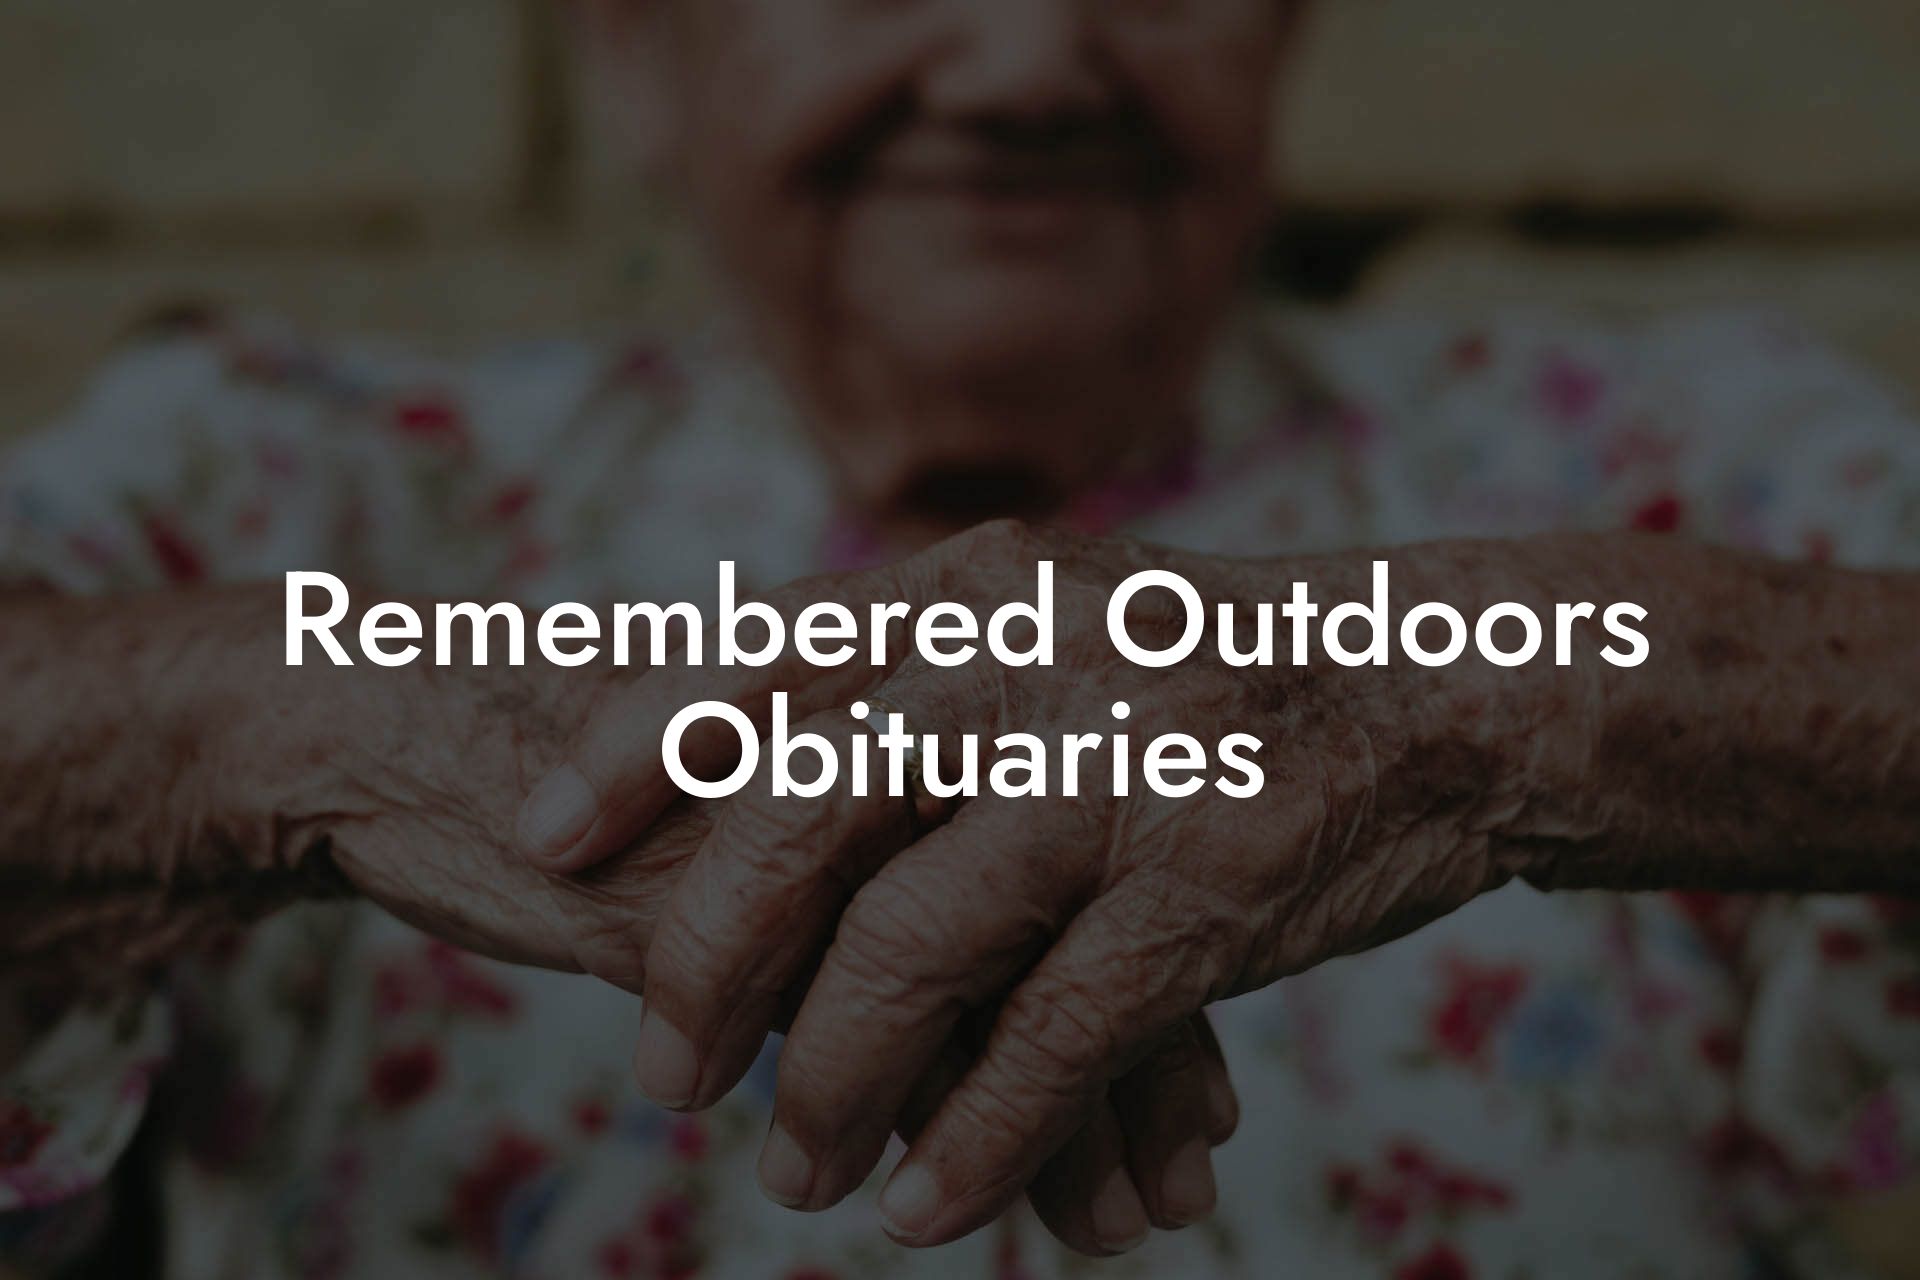 Remembered Outdoors Obituaries